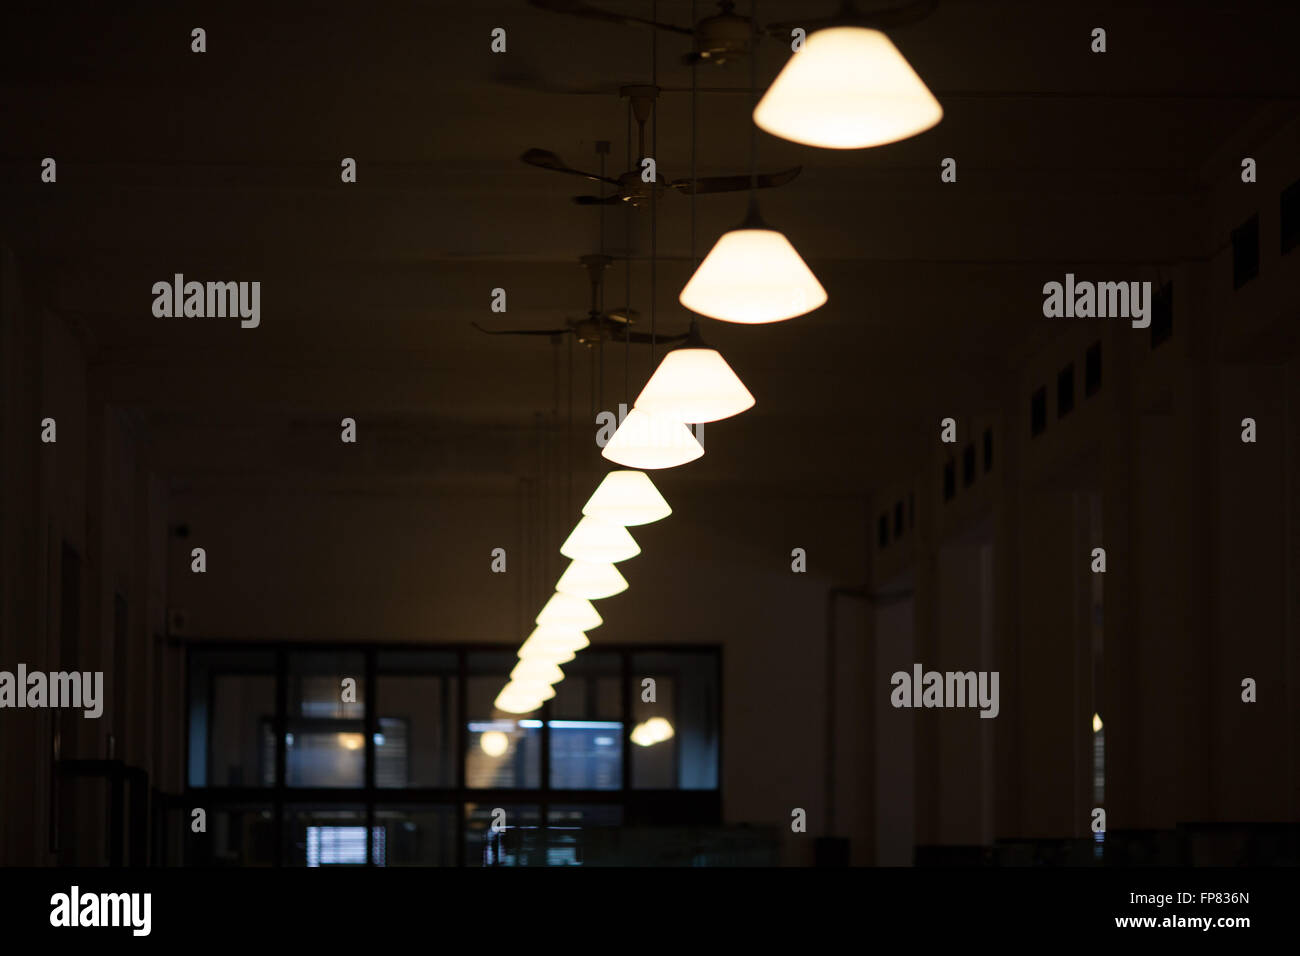 Low Angle View Of Illuminated Pendant Lights Hanging In Darkroom Stock Photo